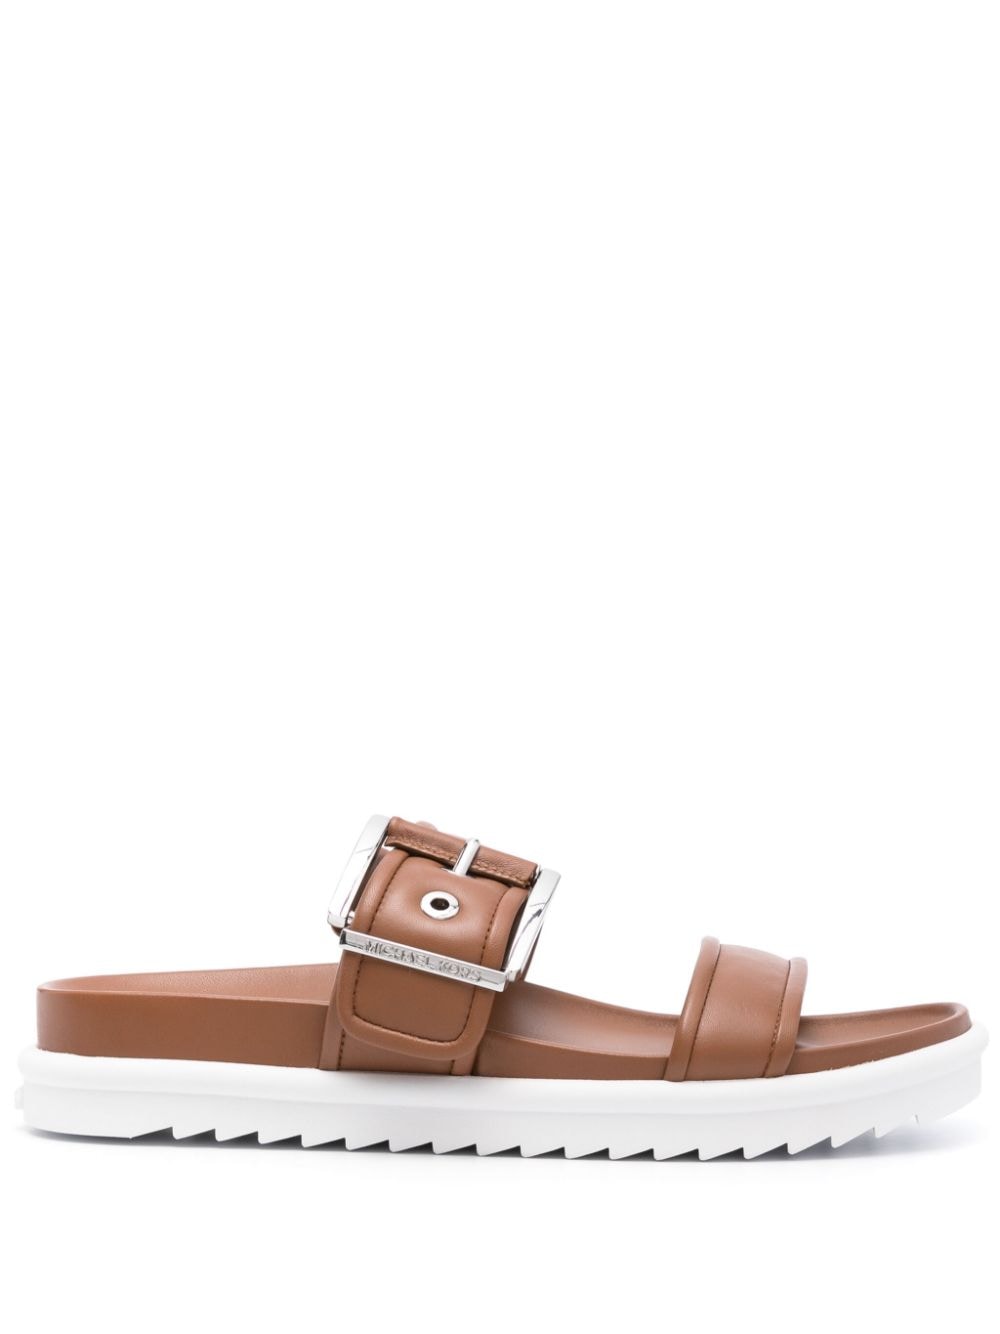 Michael Michael Kors Colby Leather Slide Sandal In Luggage